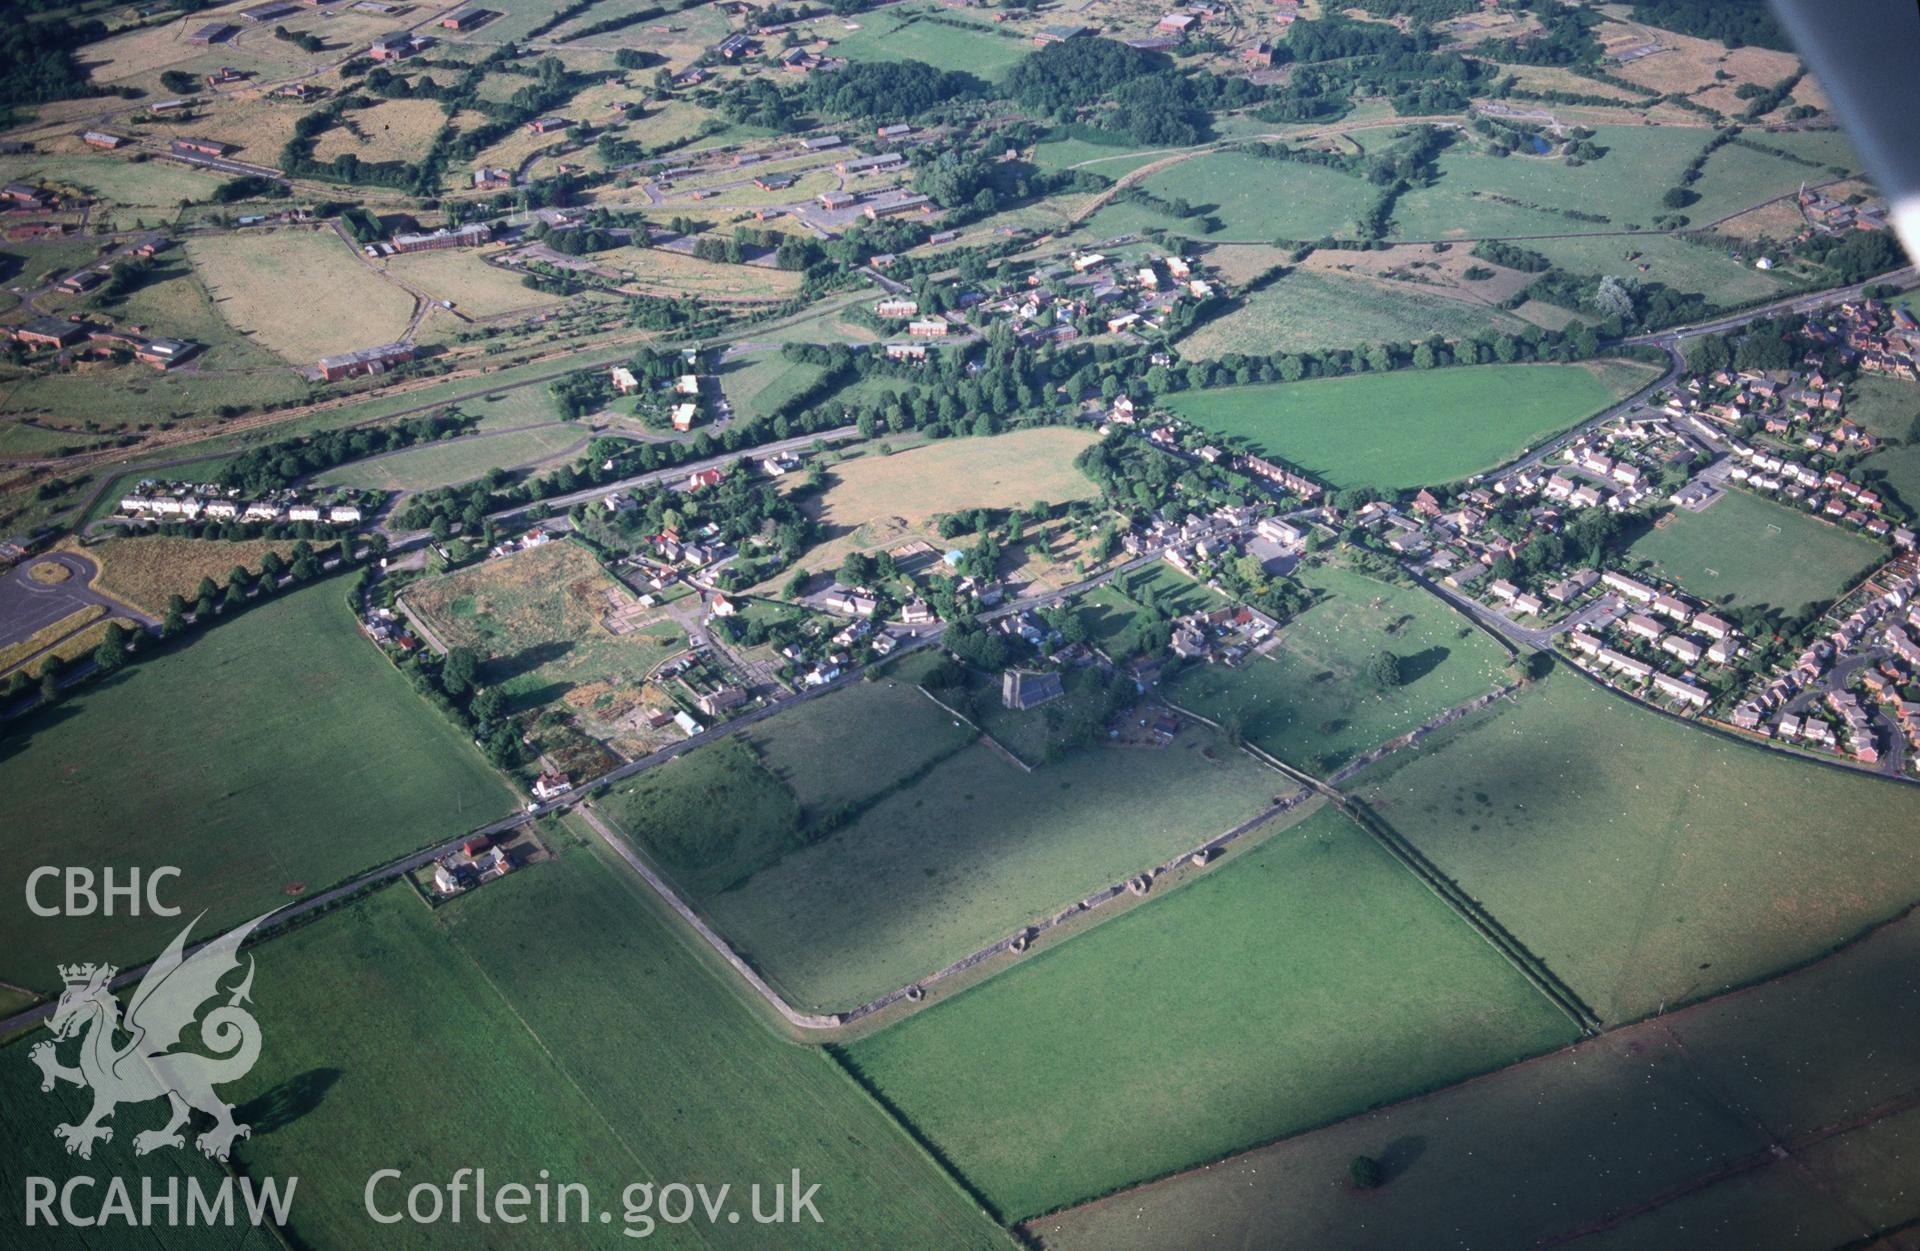 Slide of RCAHMW colour oblique aerial photograph of Caerwent, taken by T.G. Driver, 22/7/1999.